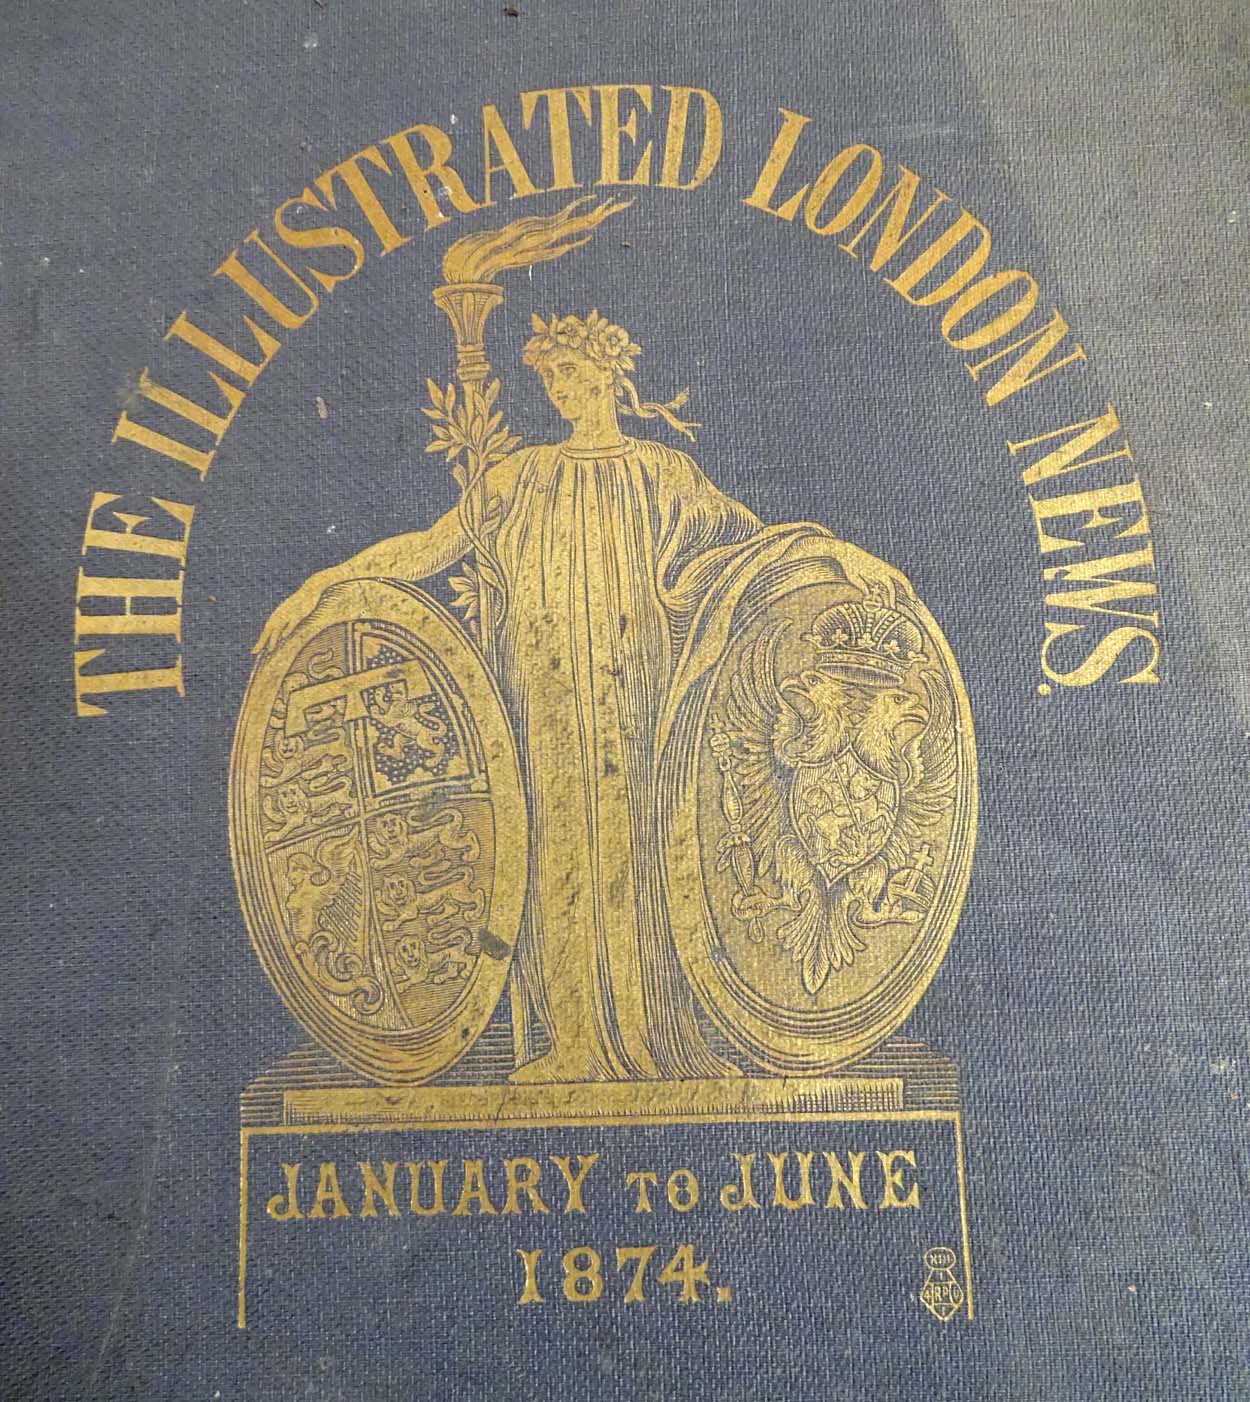 The Illustrated London News: 5 volumes of The Illustrated London News comprising: Volume I: May - Image 7 of 8